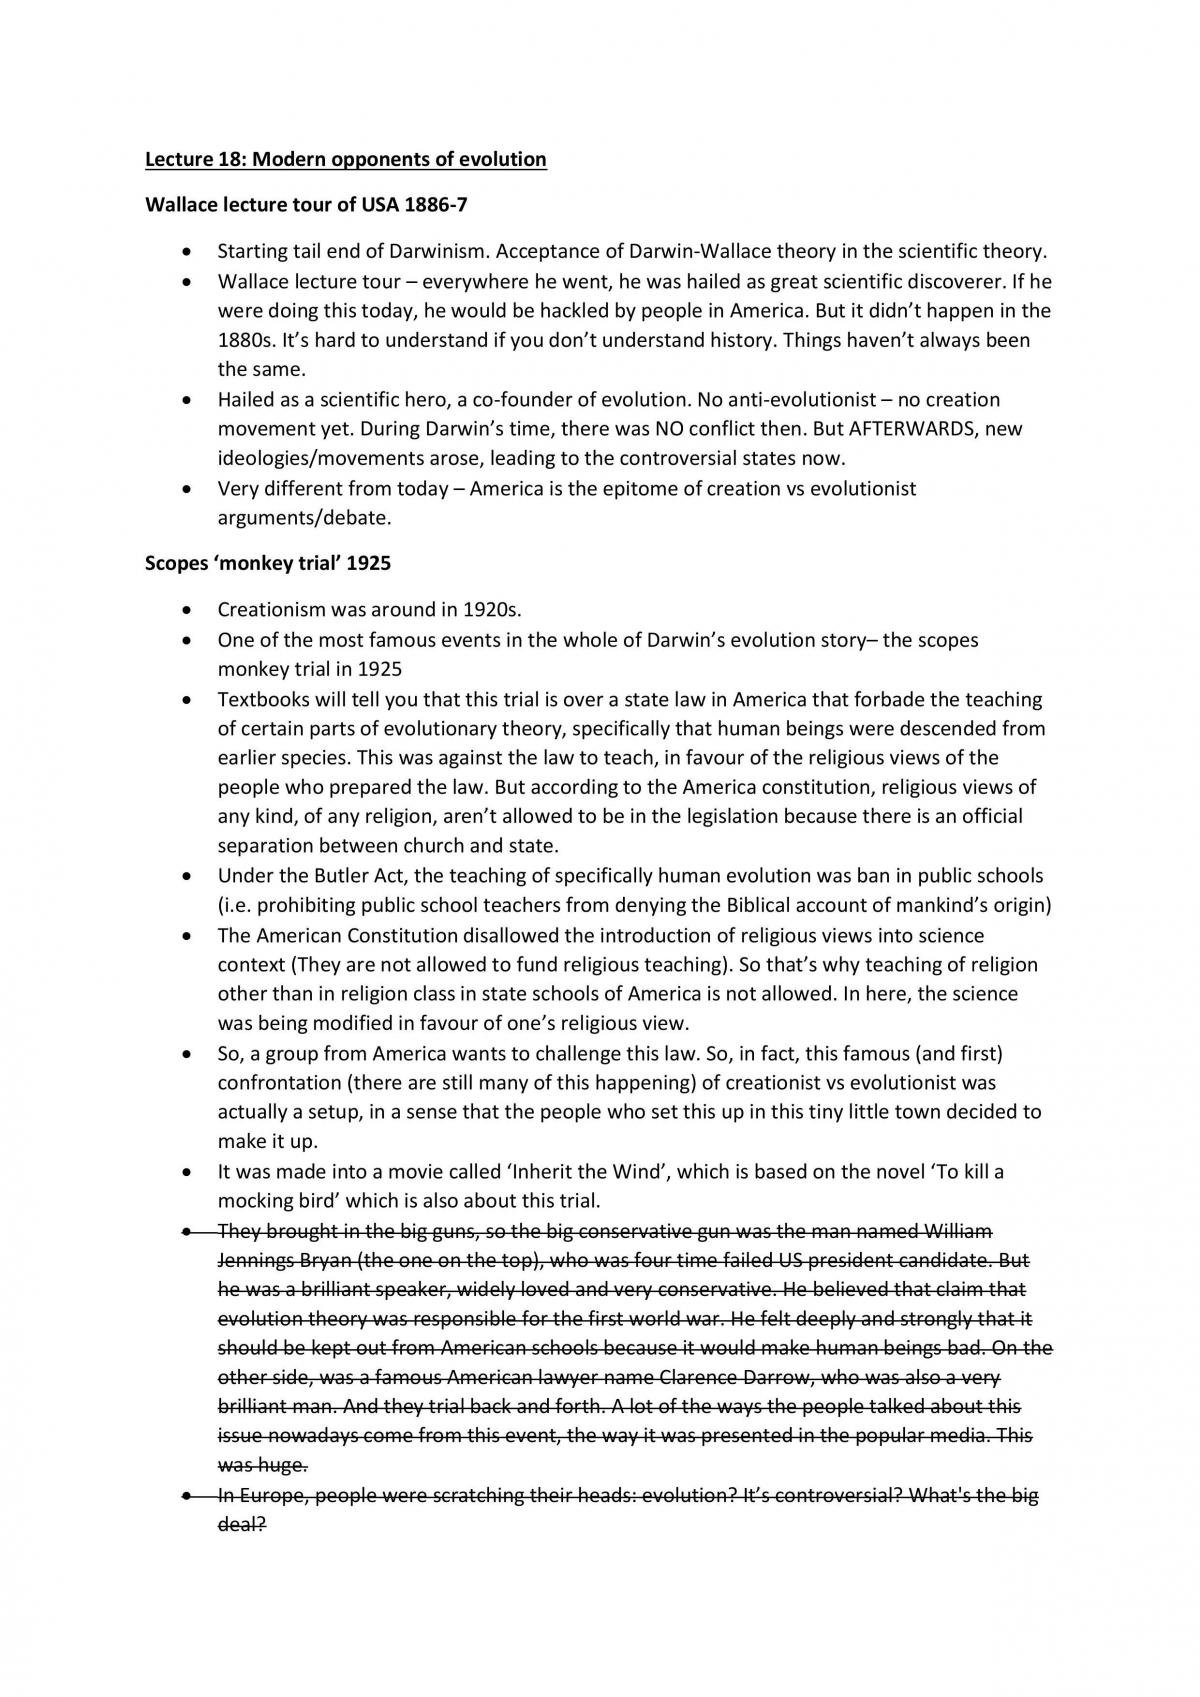 GET1020 compiled notes - Page 121